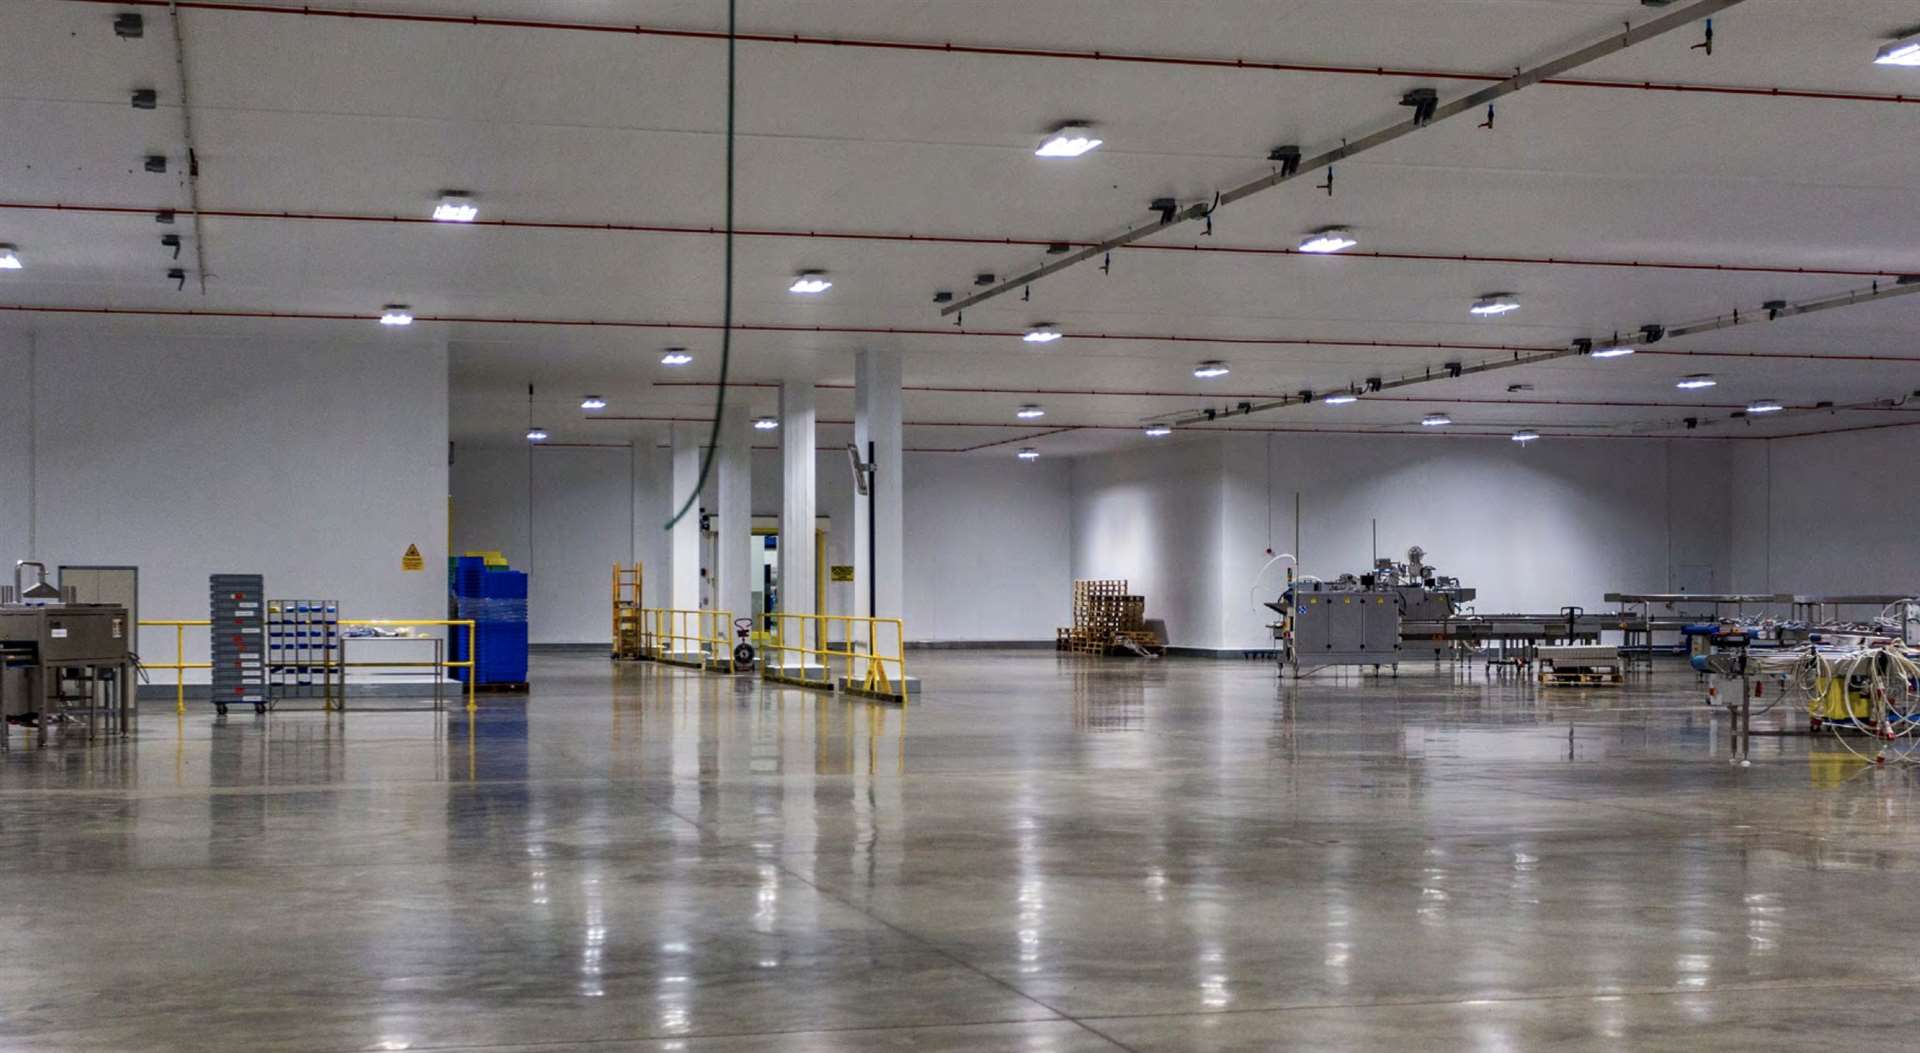 The facility has room for storage and distribution. Picture: Colliers